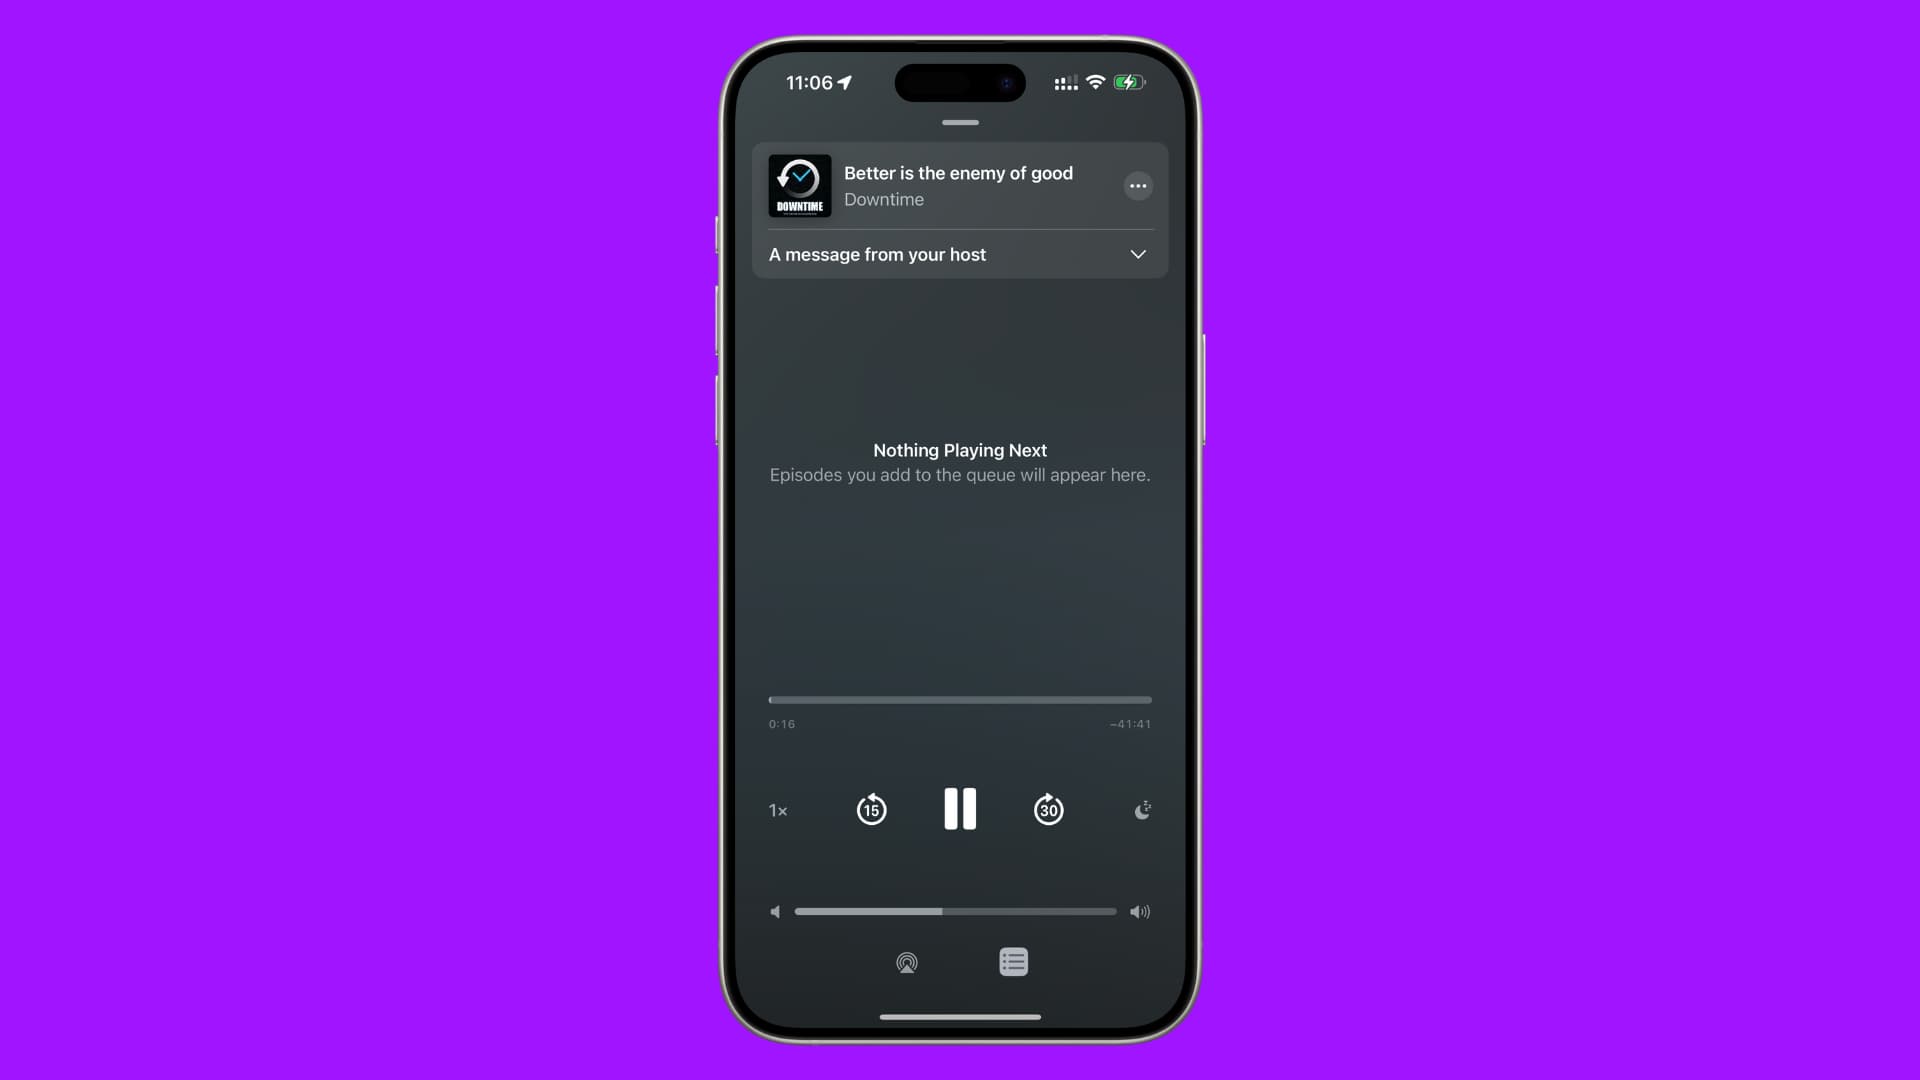 Nothing Playing Next in Podcasts app on iPhone